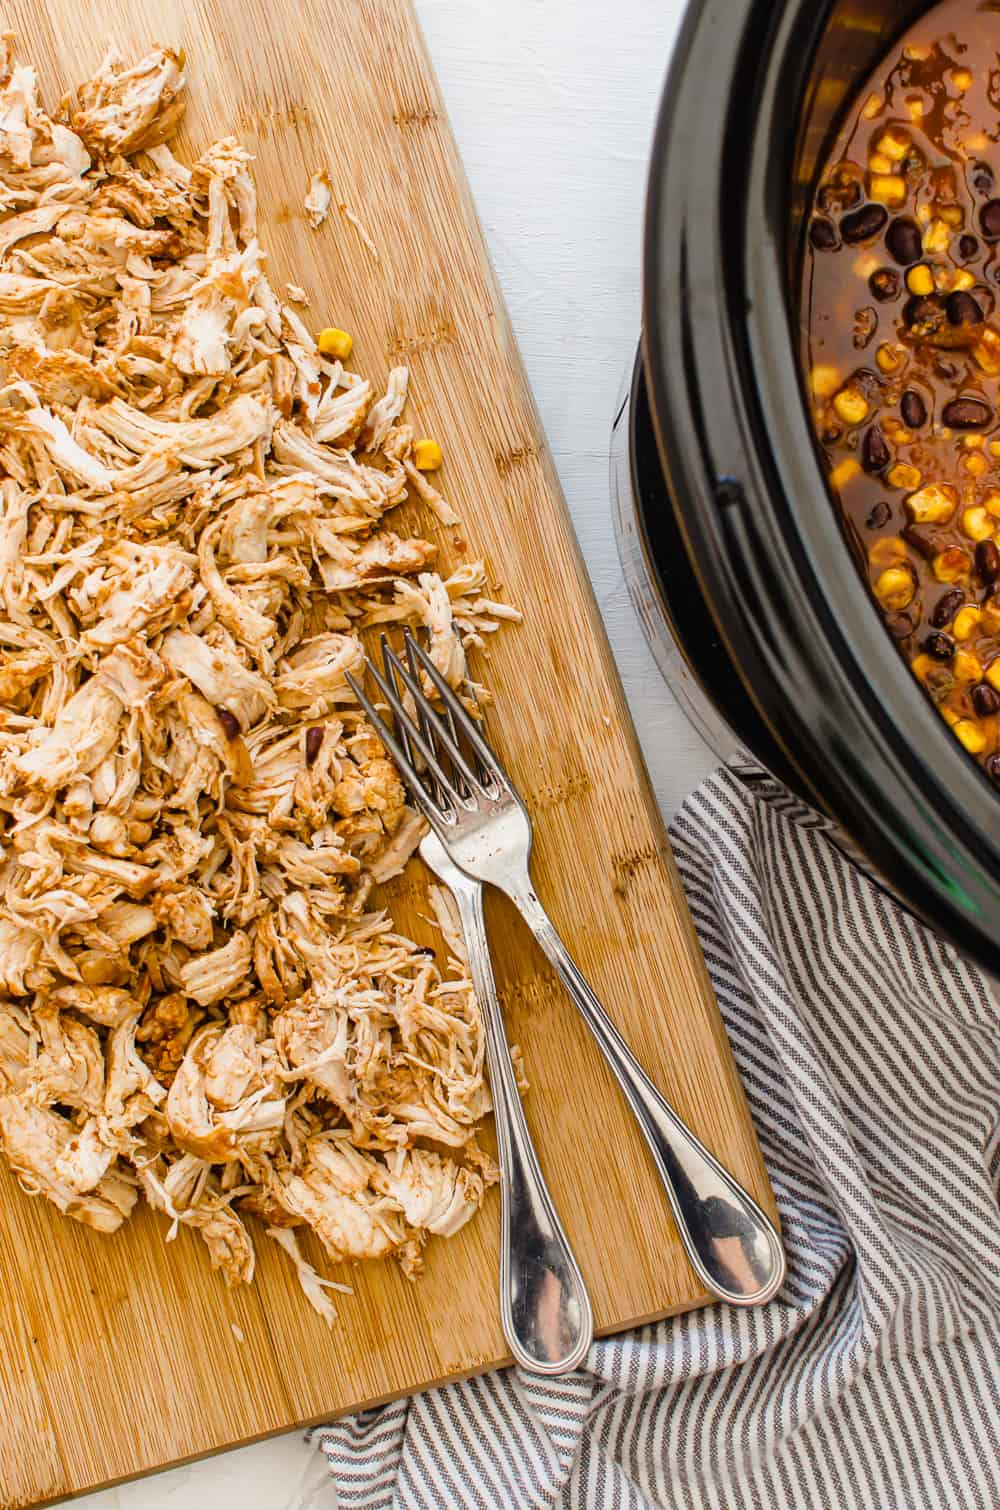 Shredded chicken on a wooden cutting board next to crockpot.